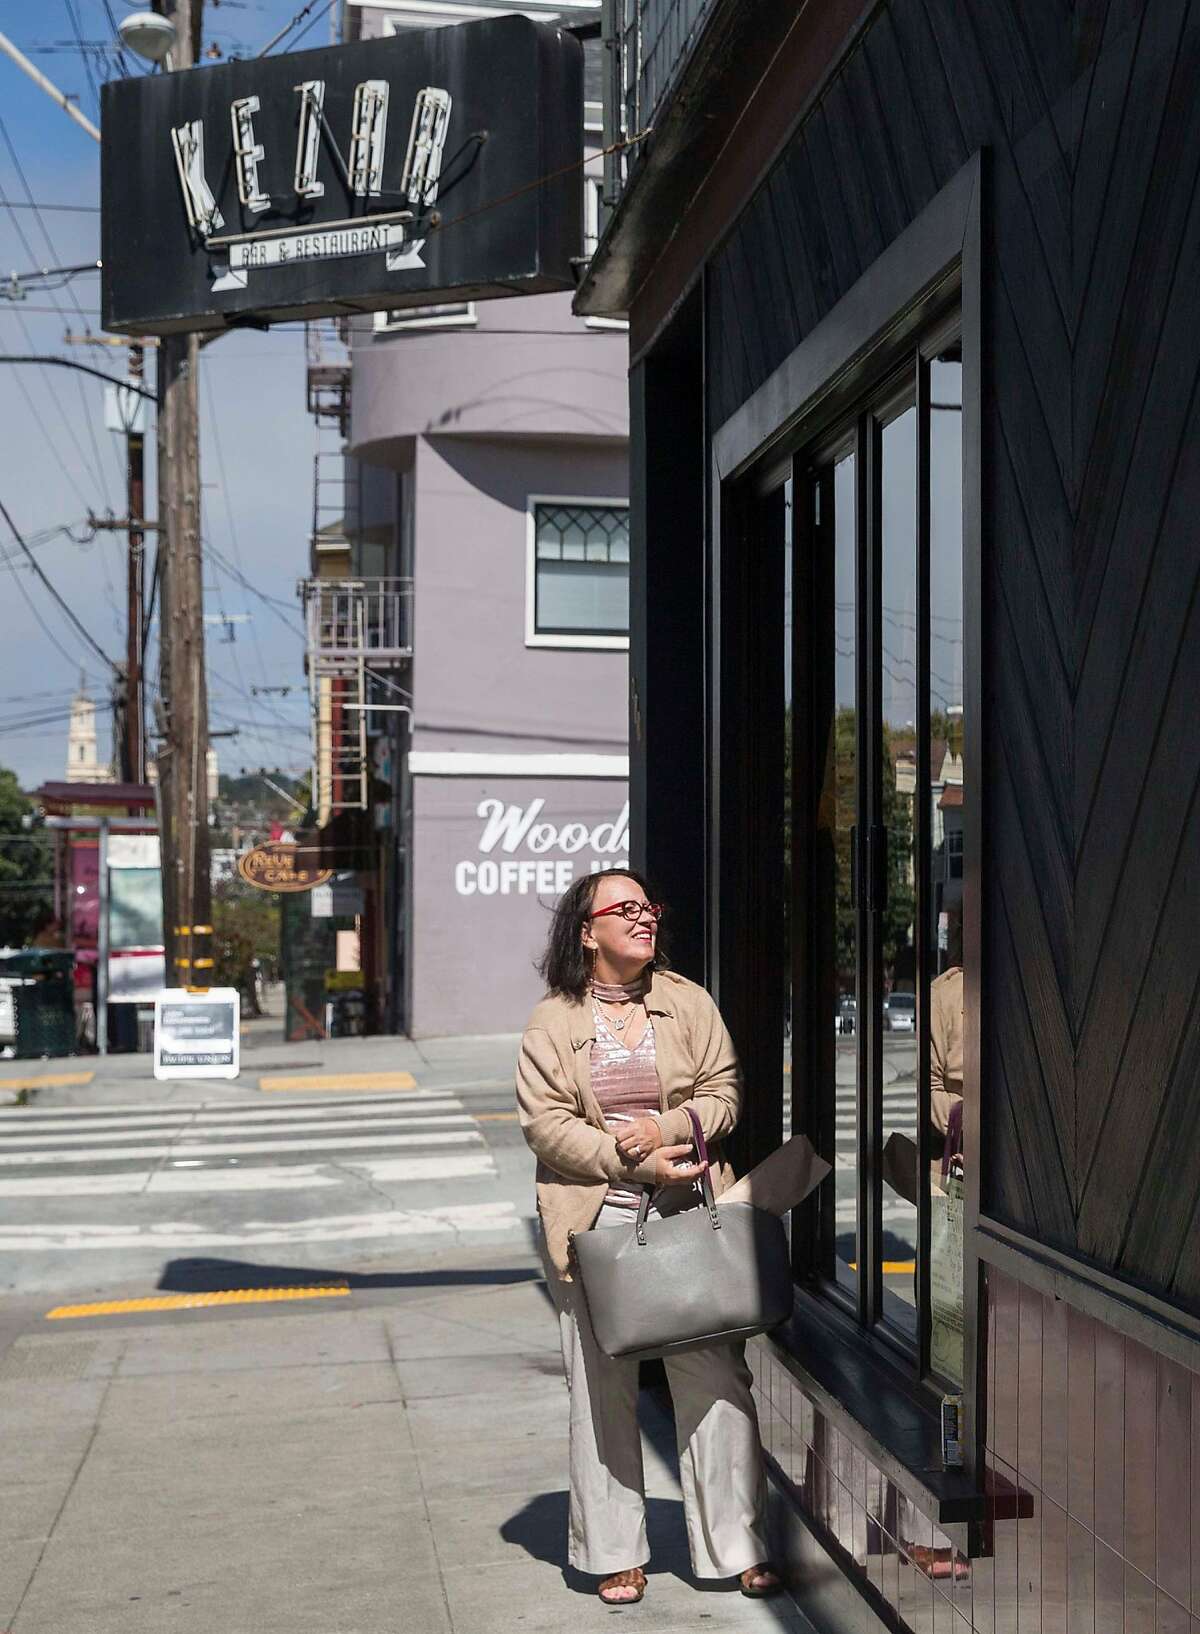 Cole Valley resident Deanna Hodgin recounts her first encounter with Max, a man who has been known to harass women and girls in the Cole Valley neighborhood of San Francisco, Calif., while standing outside of Kezar Bar and Restaurant Tuesday, Sept. 18, 2018.